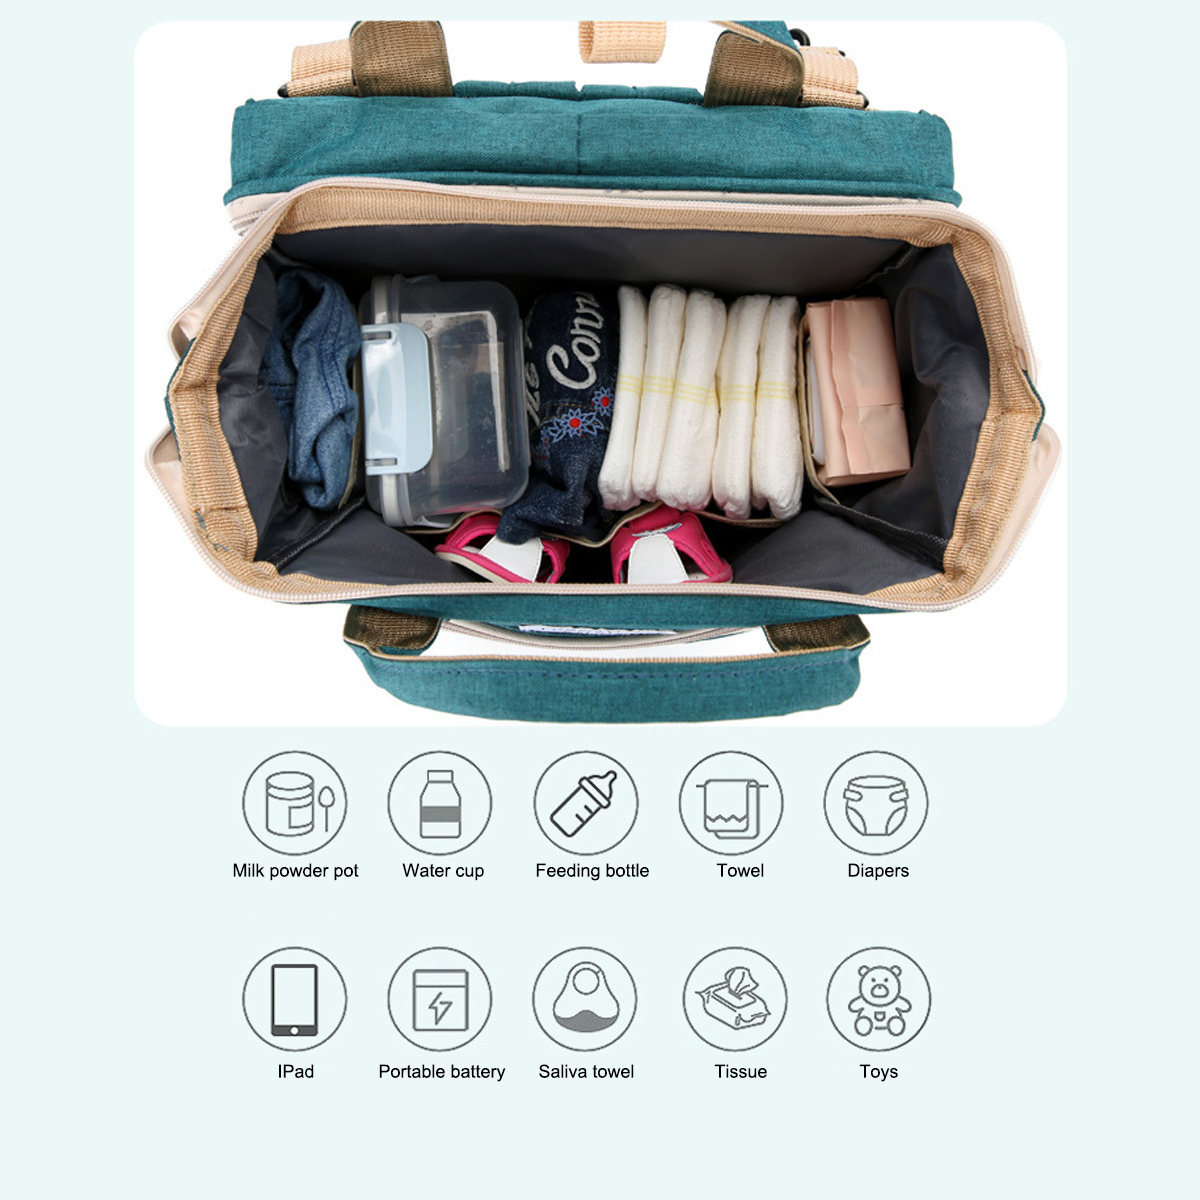 Diaper Bag Backpack, Multifunction Baby Bag with Changing Station, Foldable Crib, Insulation Milk Bottle Pocket, Waterproof Large Capacity Travel Bag with USB Charging Port, Gift for Mom Dad - image 5 of 11